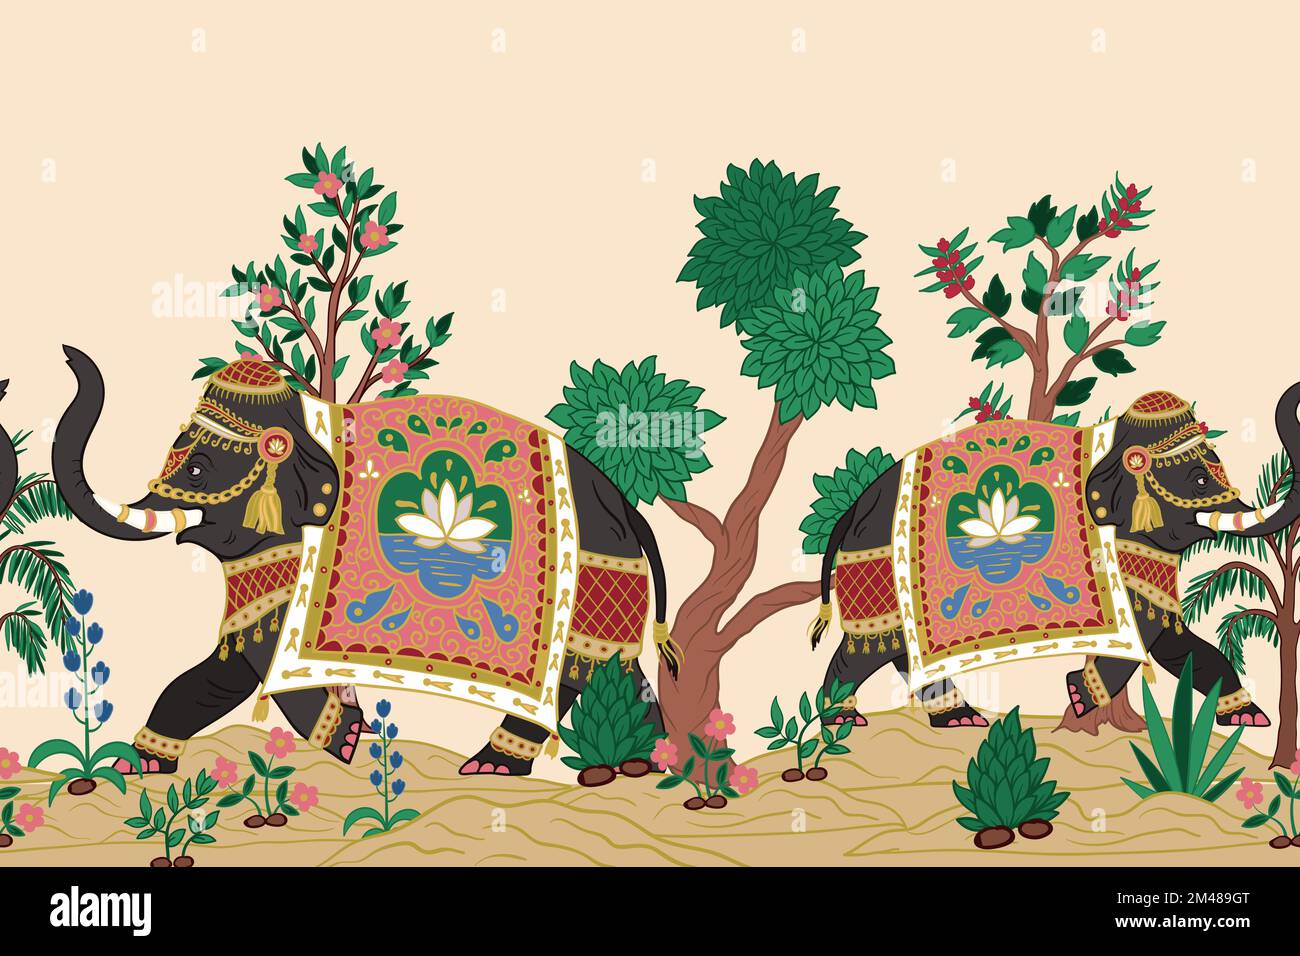 Border with Indian elephants and decorative elements. Vector. Stock Vector